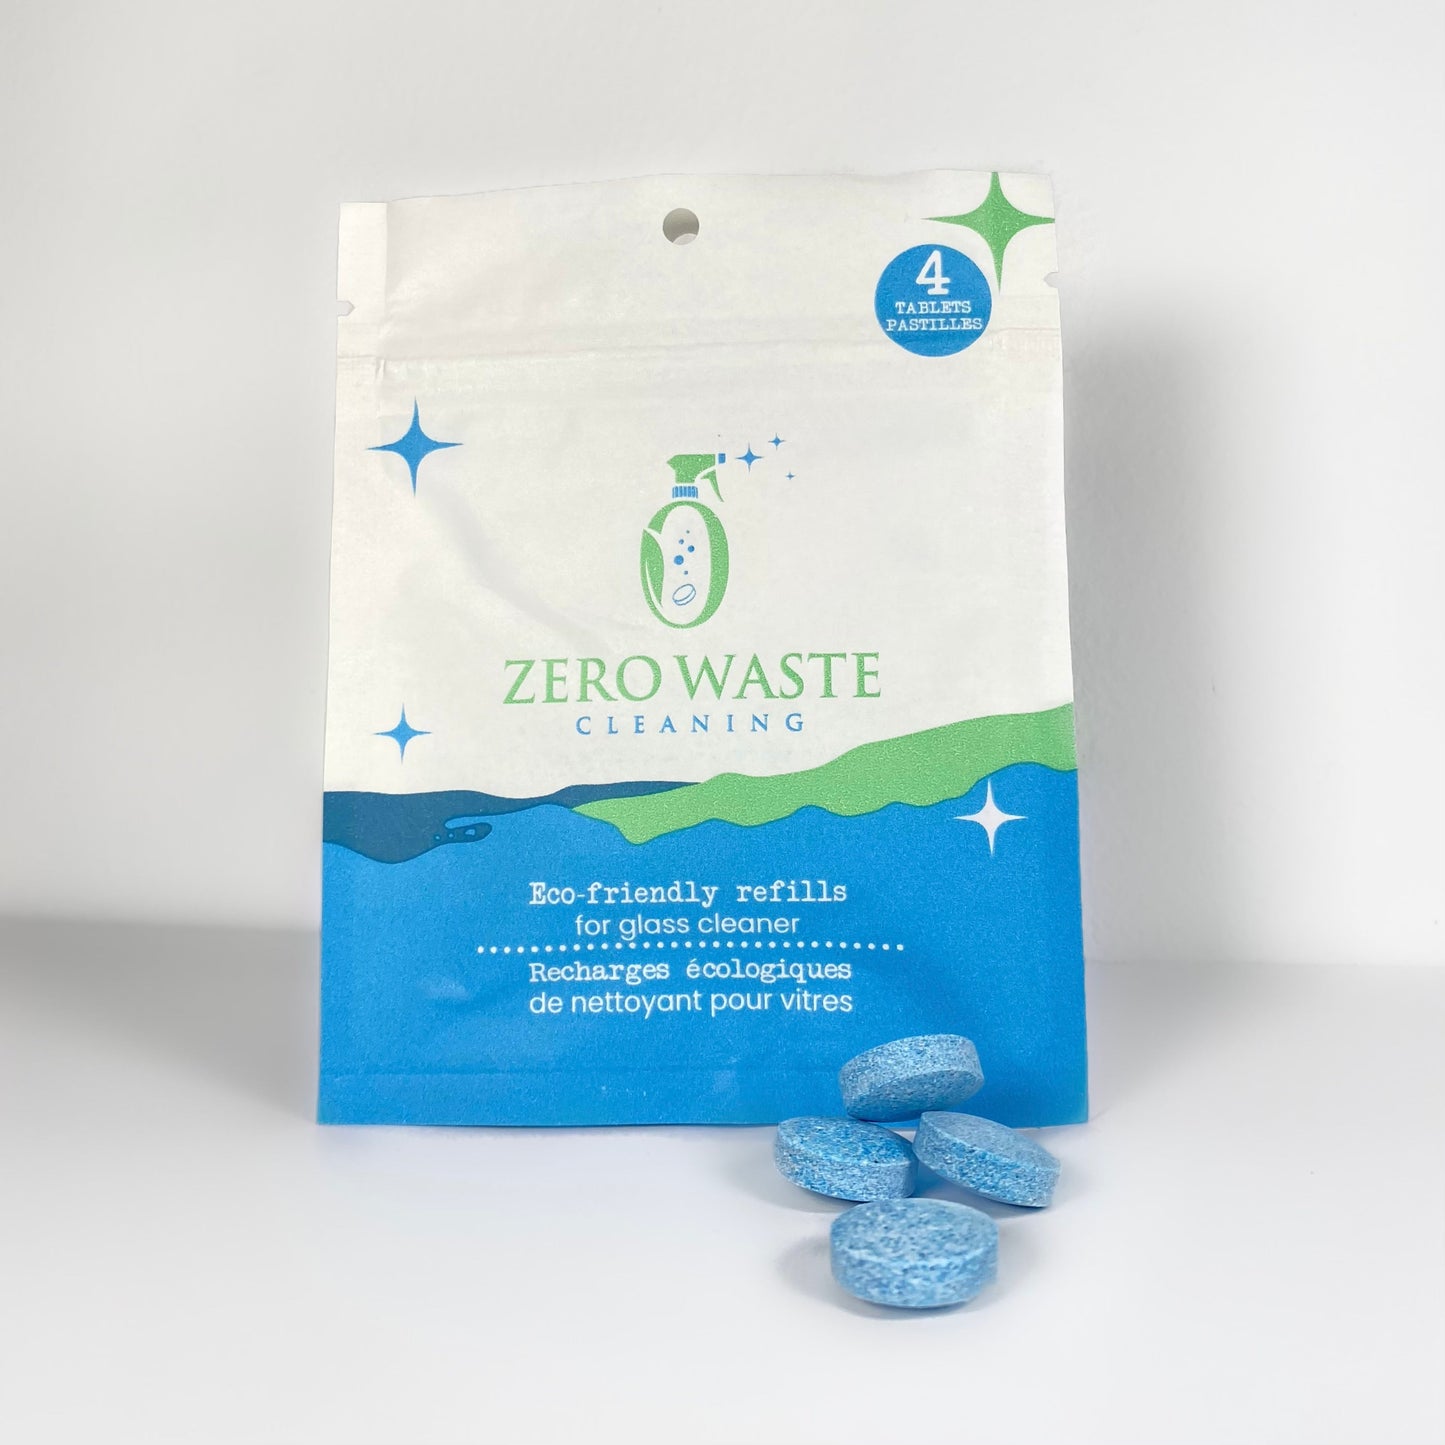 0wastecleaning Glass cleaner refill - pack of 4 zero waste-sustainable-refill tablet  magasin zero dechet a Montreal vegan cleaner-pet friendly cleaner